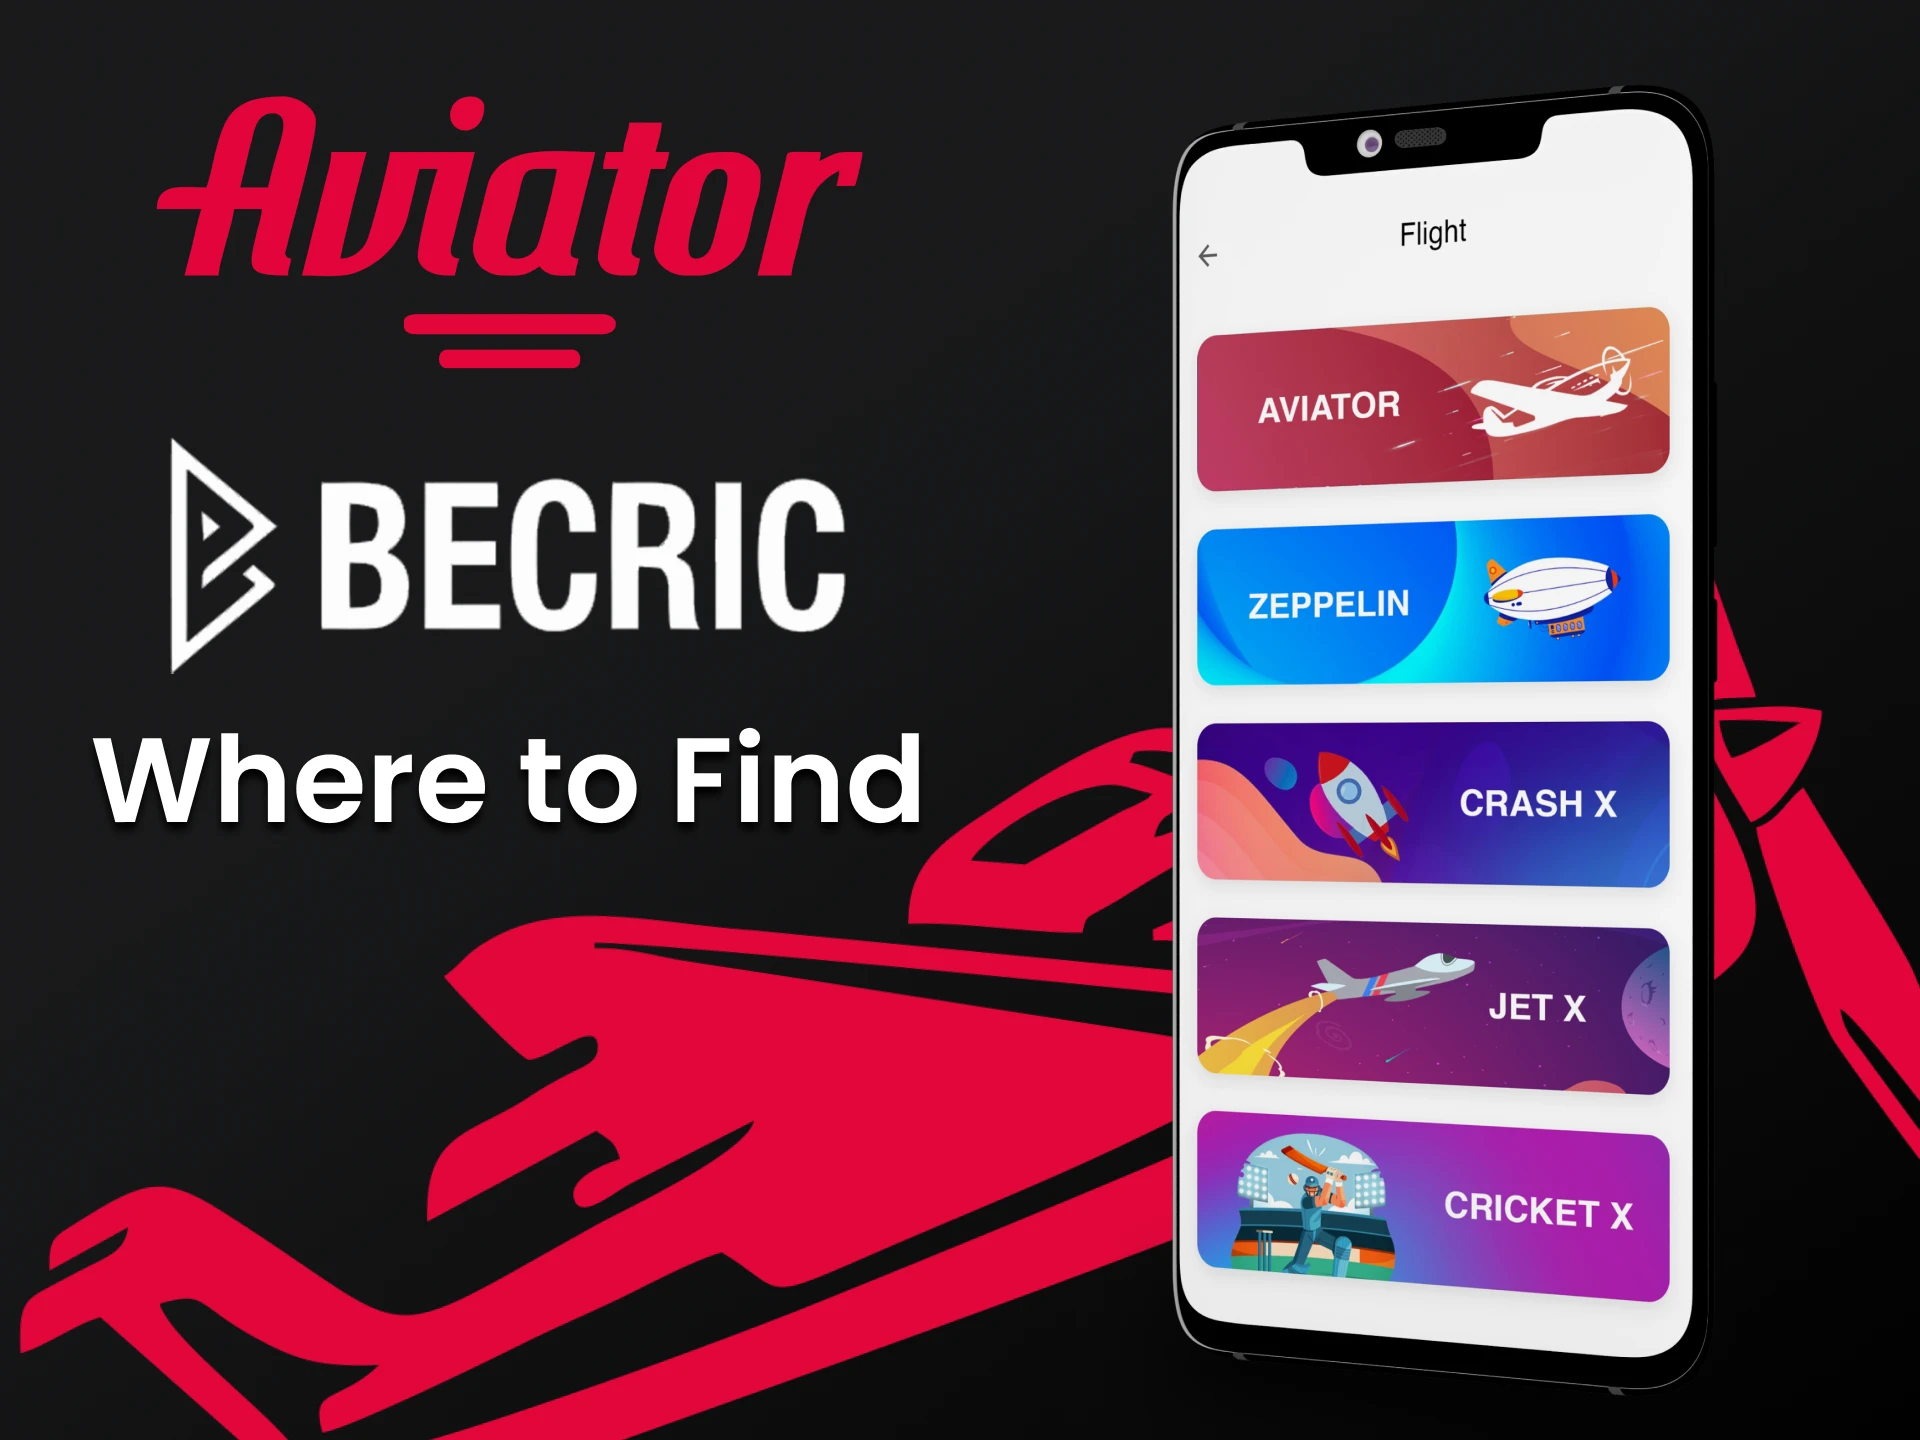 Finding the game Avaitor in the Becric application will be difficult.